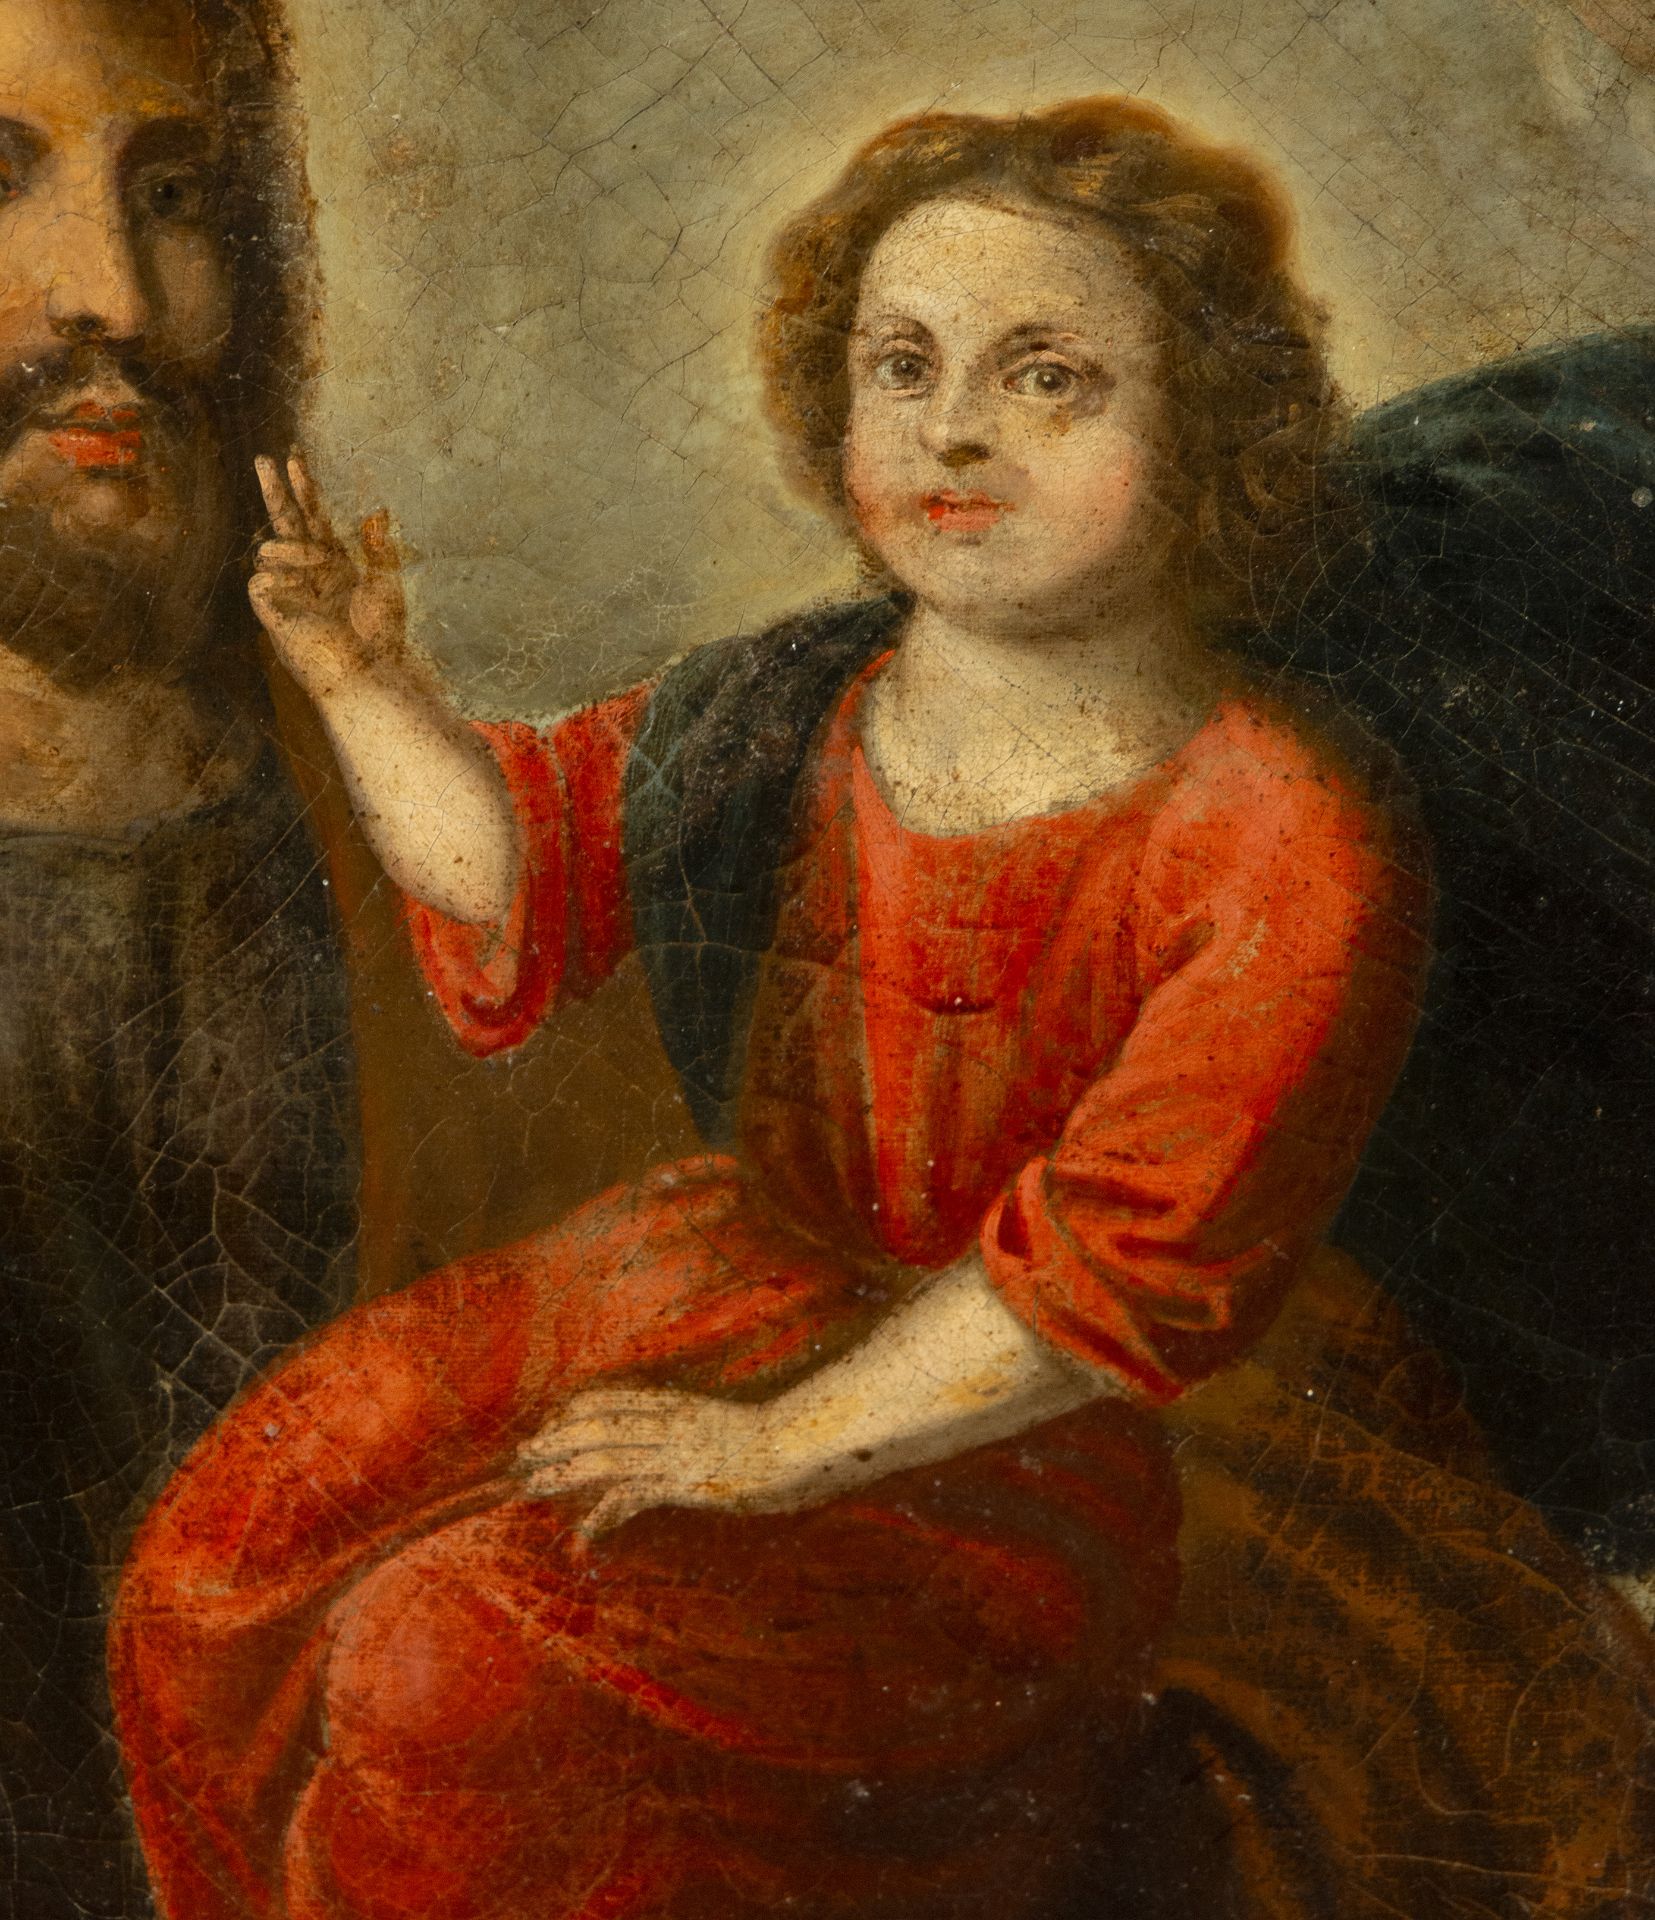 Saint Joseph with Child Jesus. Spanish or colonial school from the 17th century - Image 3 of 5